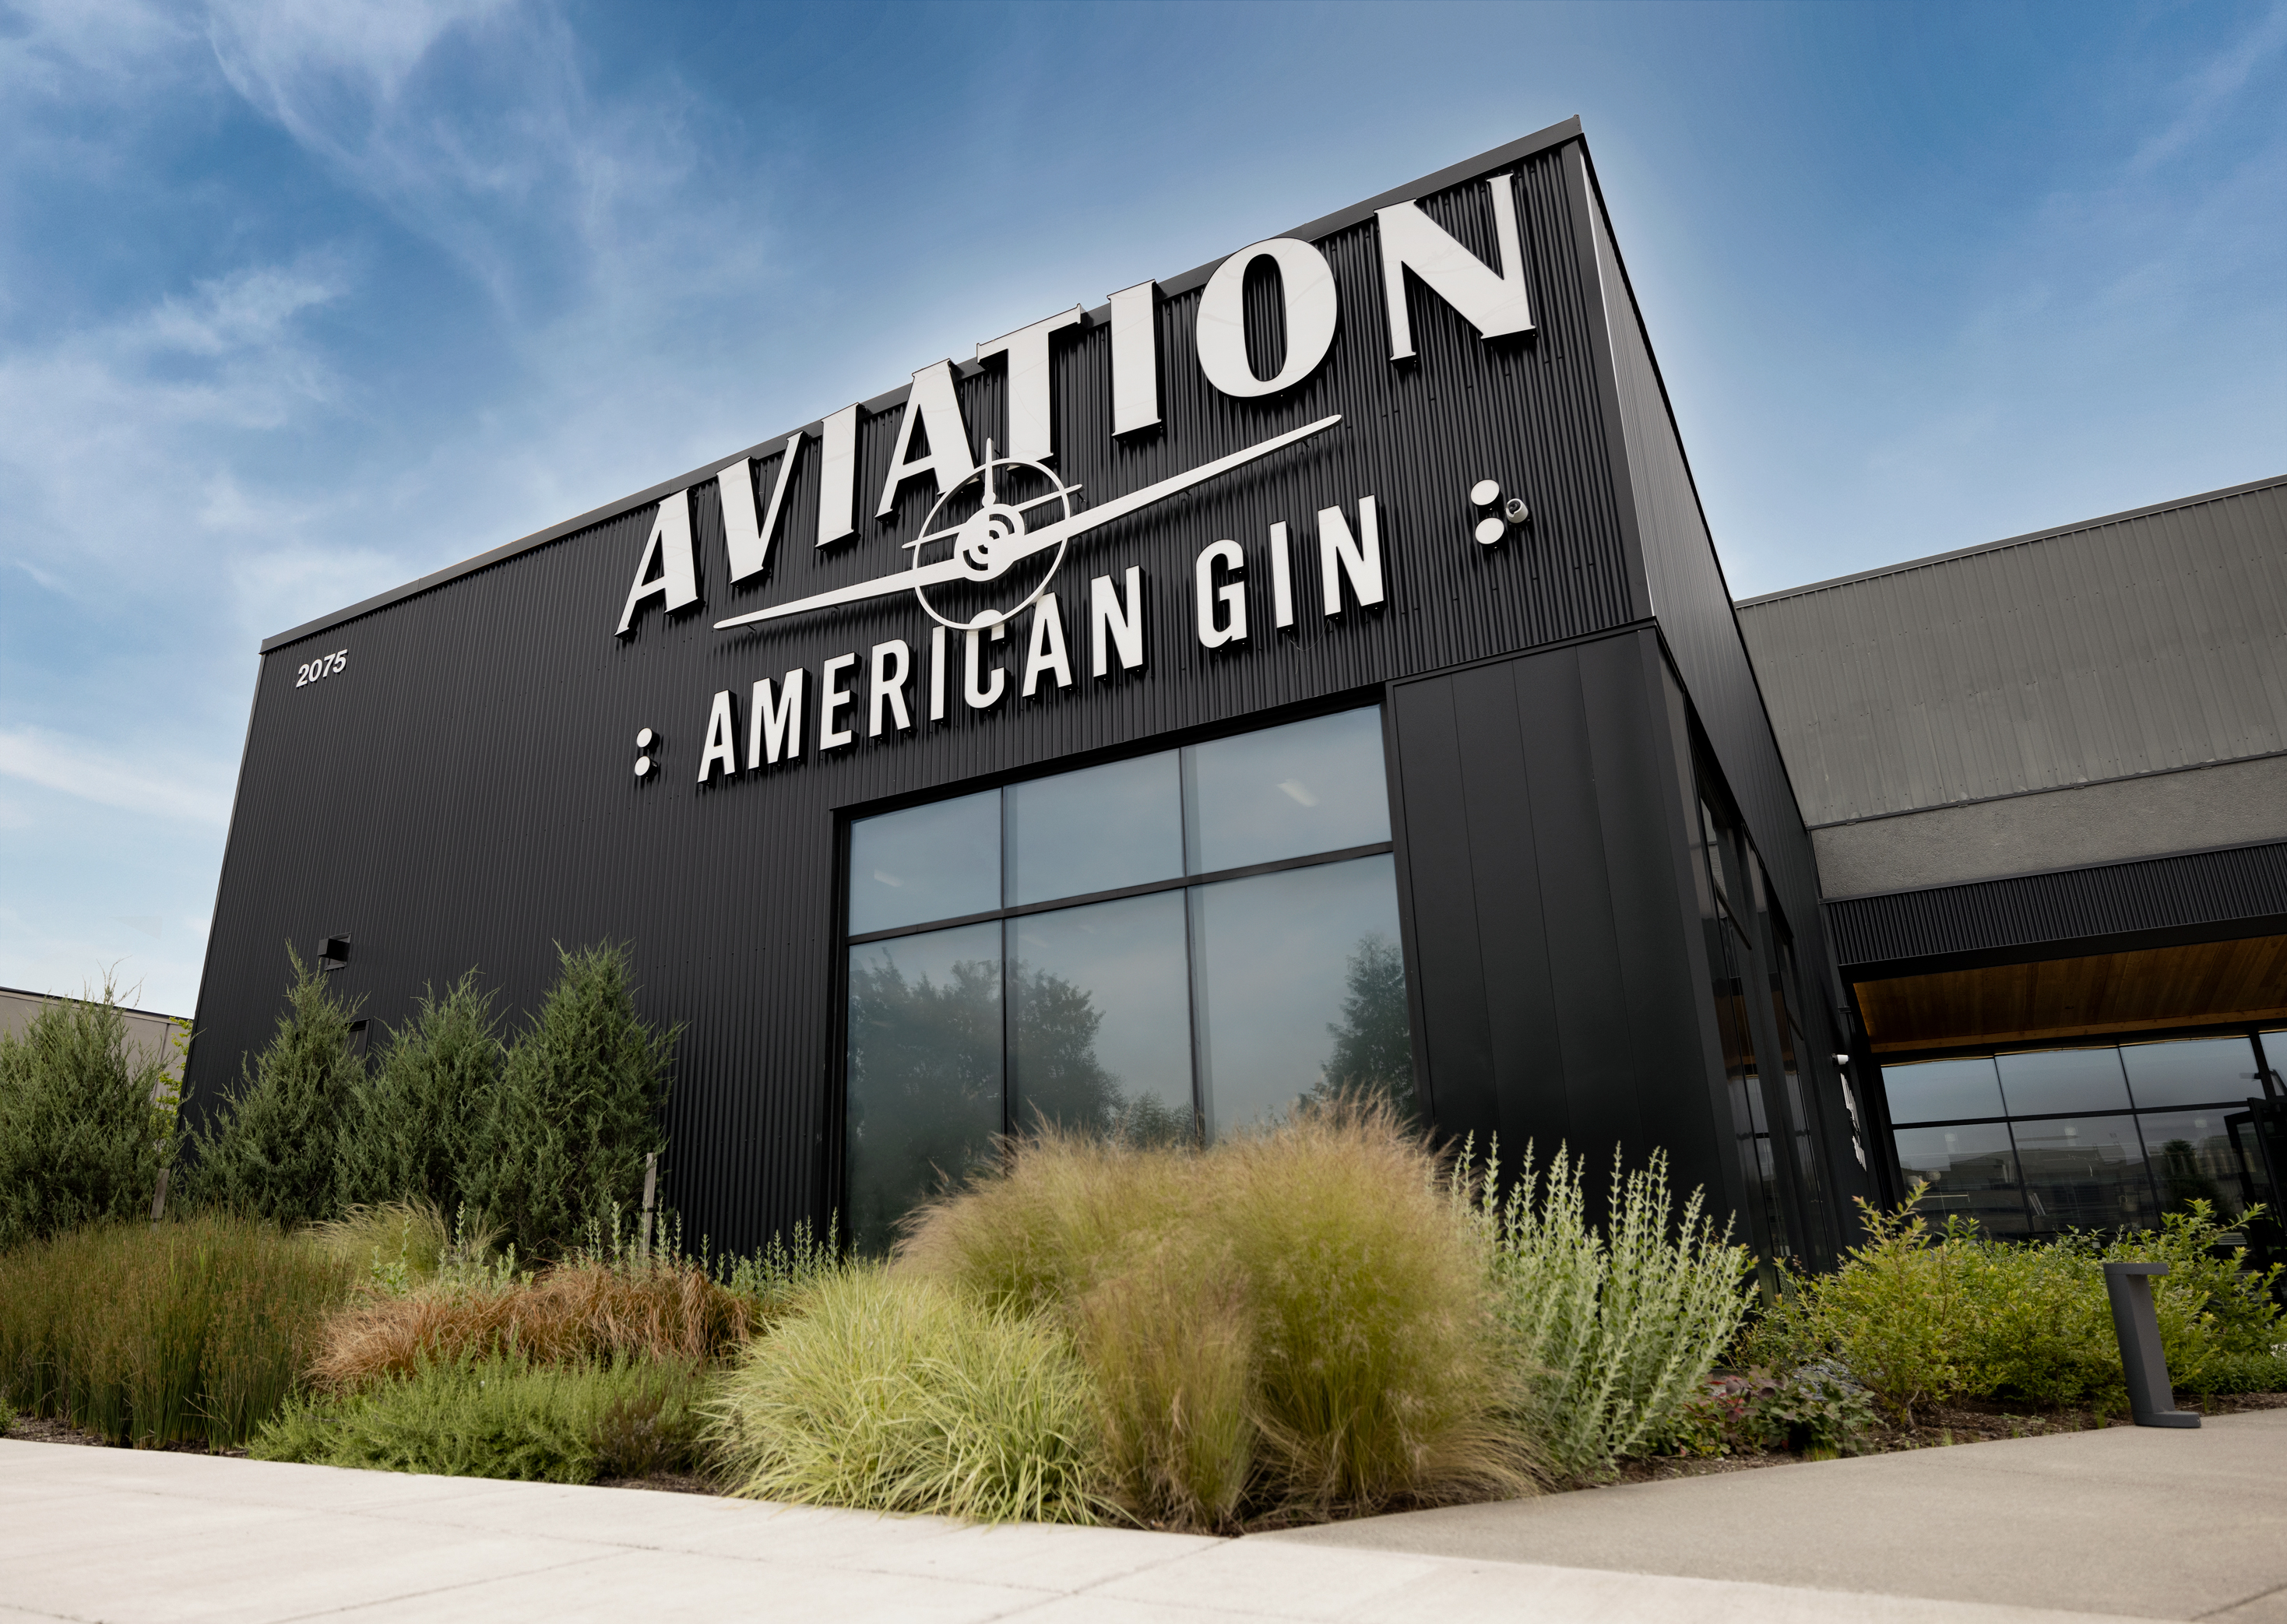 | Oregon Gin\'s New Doors Aviation Business in Opens Wire Portland, Distillery its American